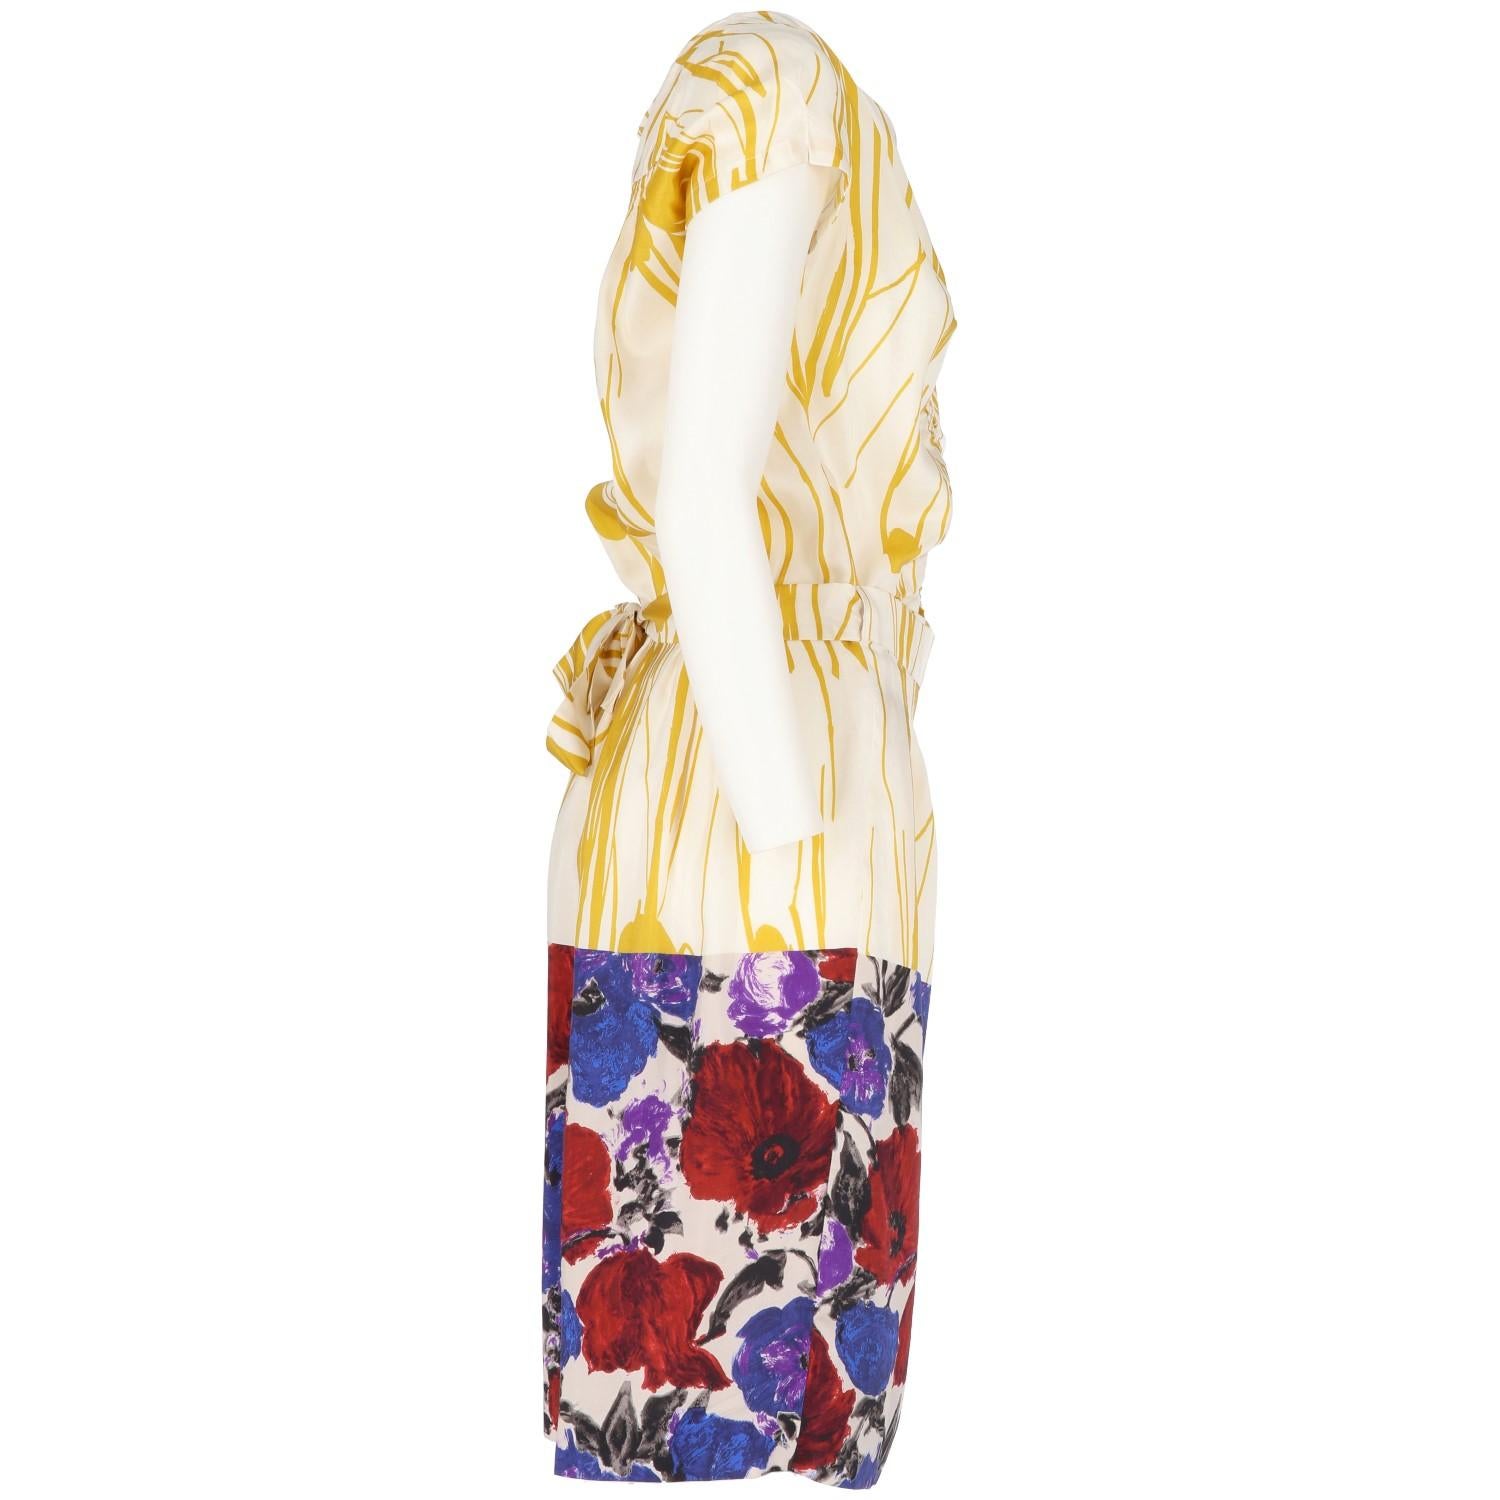 Vivid and fresh Dries Van Noten printed silk short sleeved dress. It features a a mustard yellow pattern and a contrasting floral pattern panel in blue, red, black and purple on the bottom of the belted wrap skirt. V-neckline, gathered fabric on the